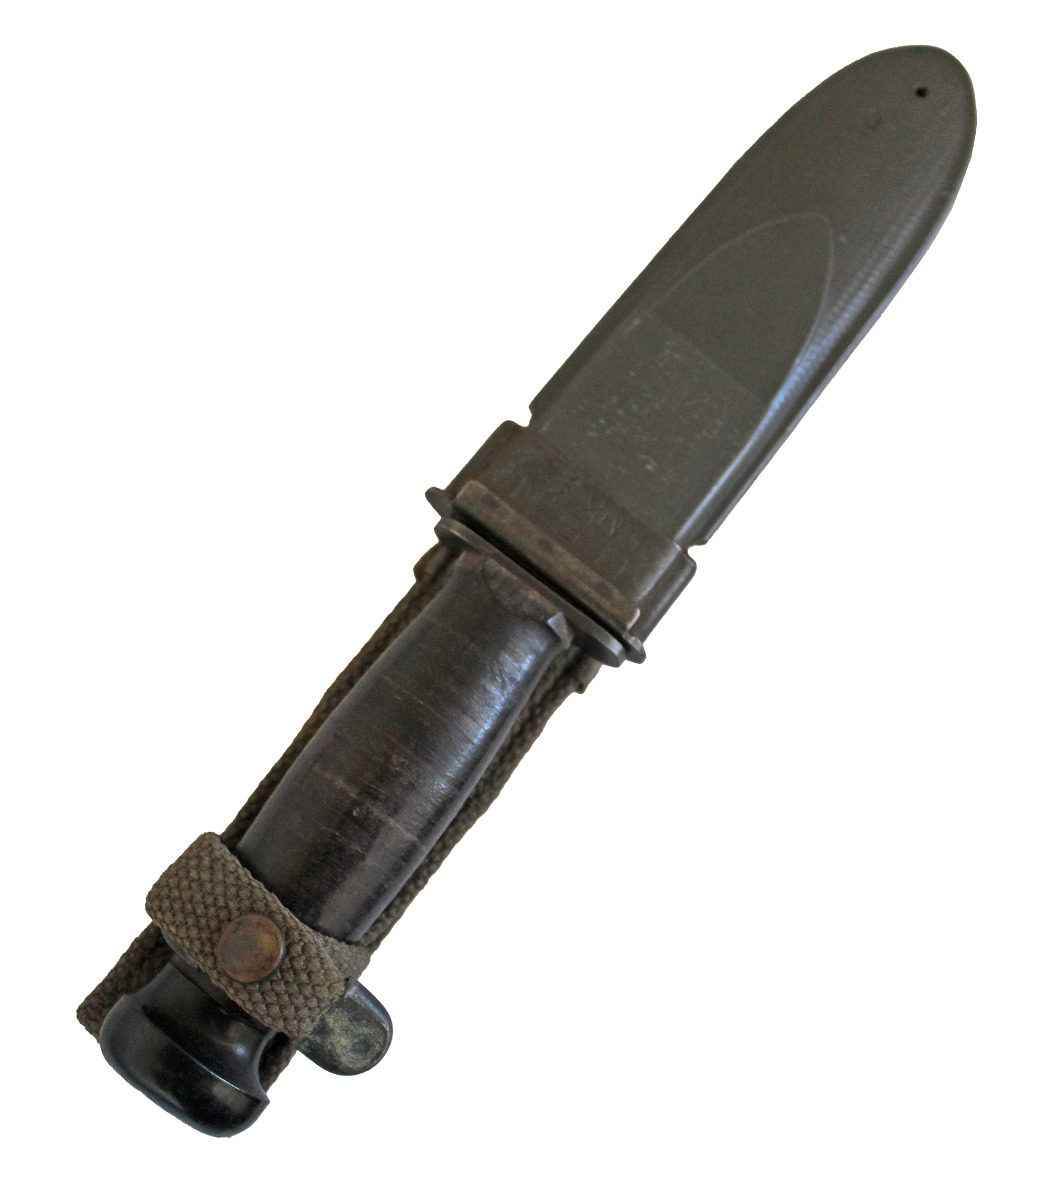 U.S. WWII NAVY USN MARK 1 FIGHTING KNIFE BY CAMILLUS WITH Mk1 SCABBARD